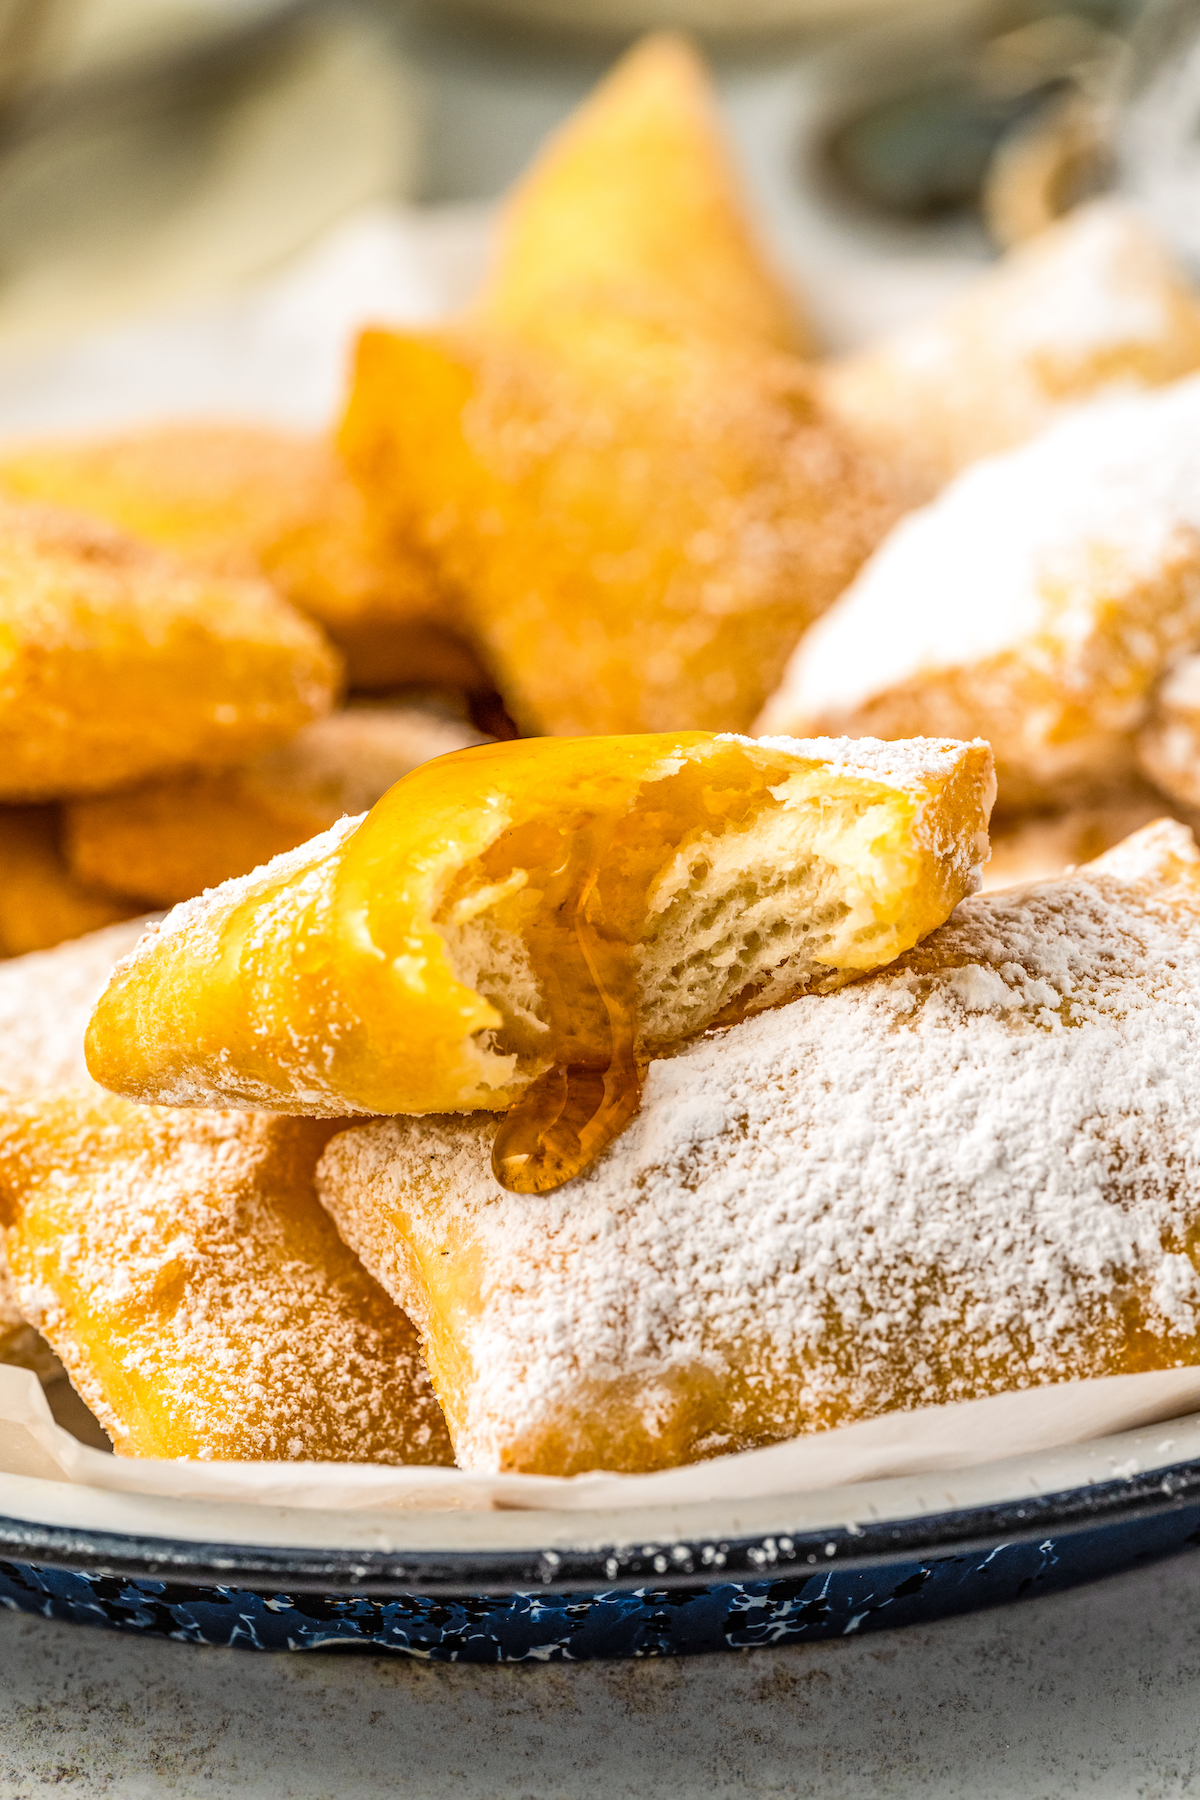 Sopapillas on a plate coated in powdered sugar with honey drizzled over a sopapilla with a bite taken out of it.